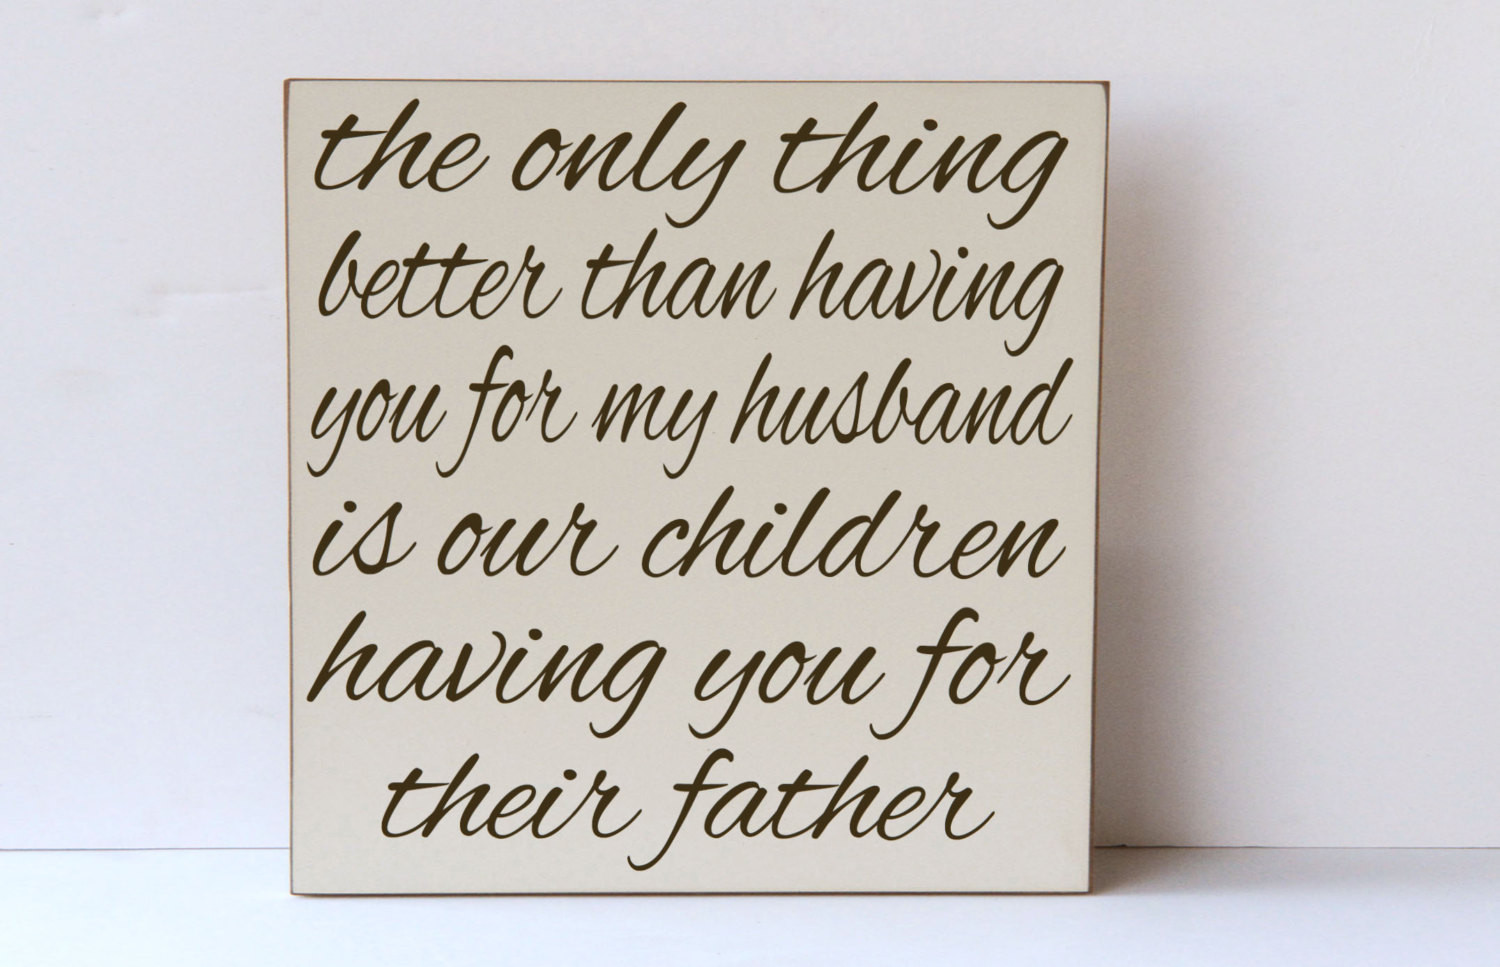 Husband Fathers Day Quotes
 Fathers Day Quotes For Husband – Quotesta